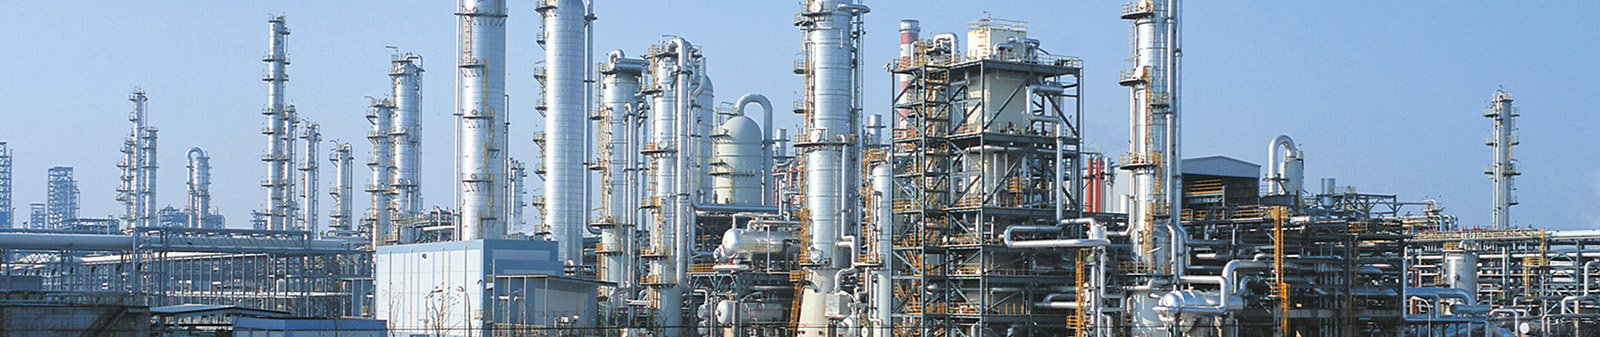 Refining and petrochemicals